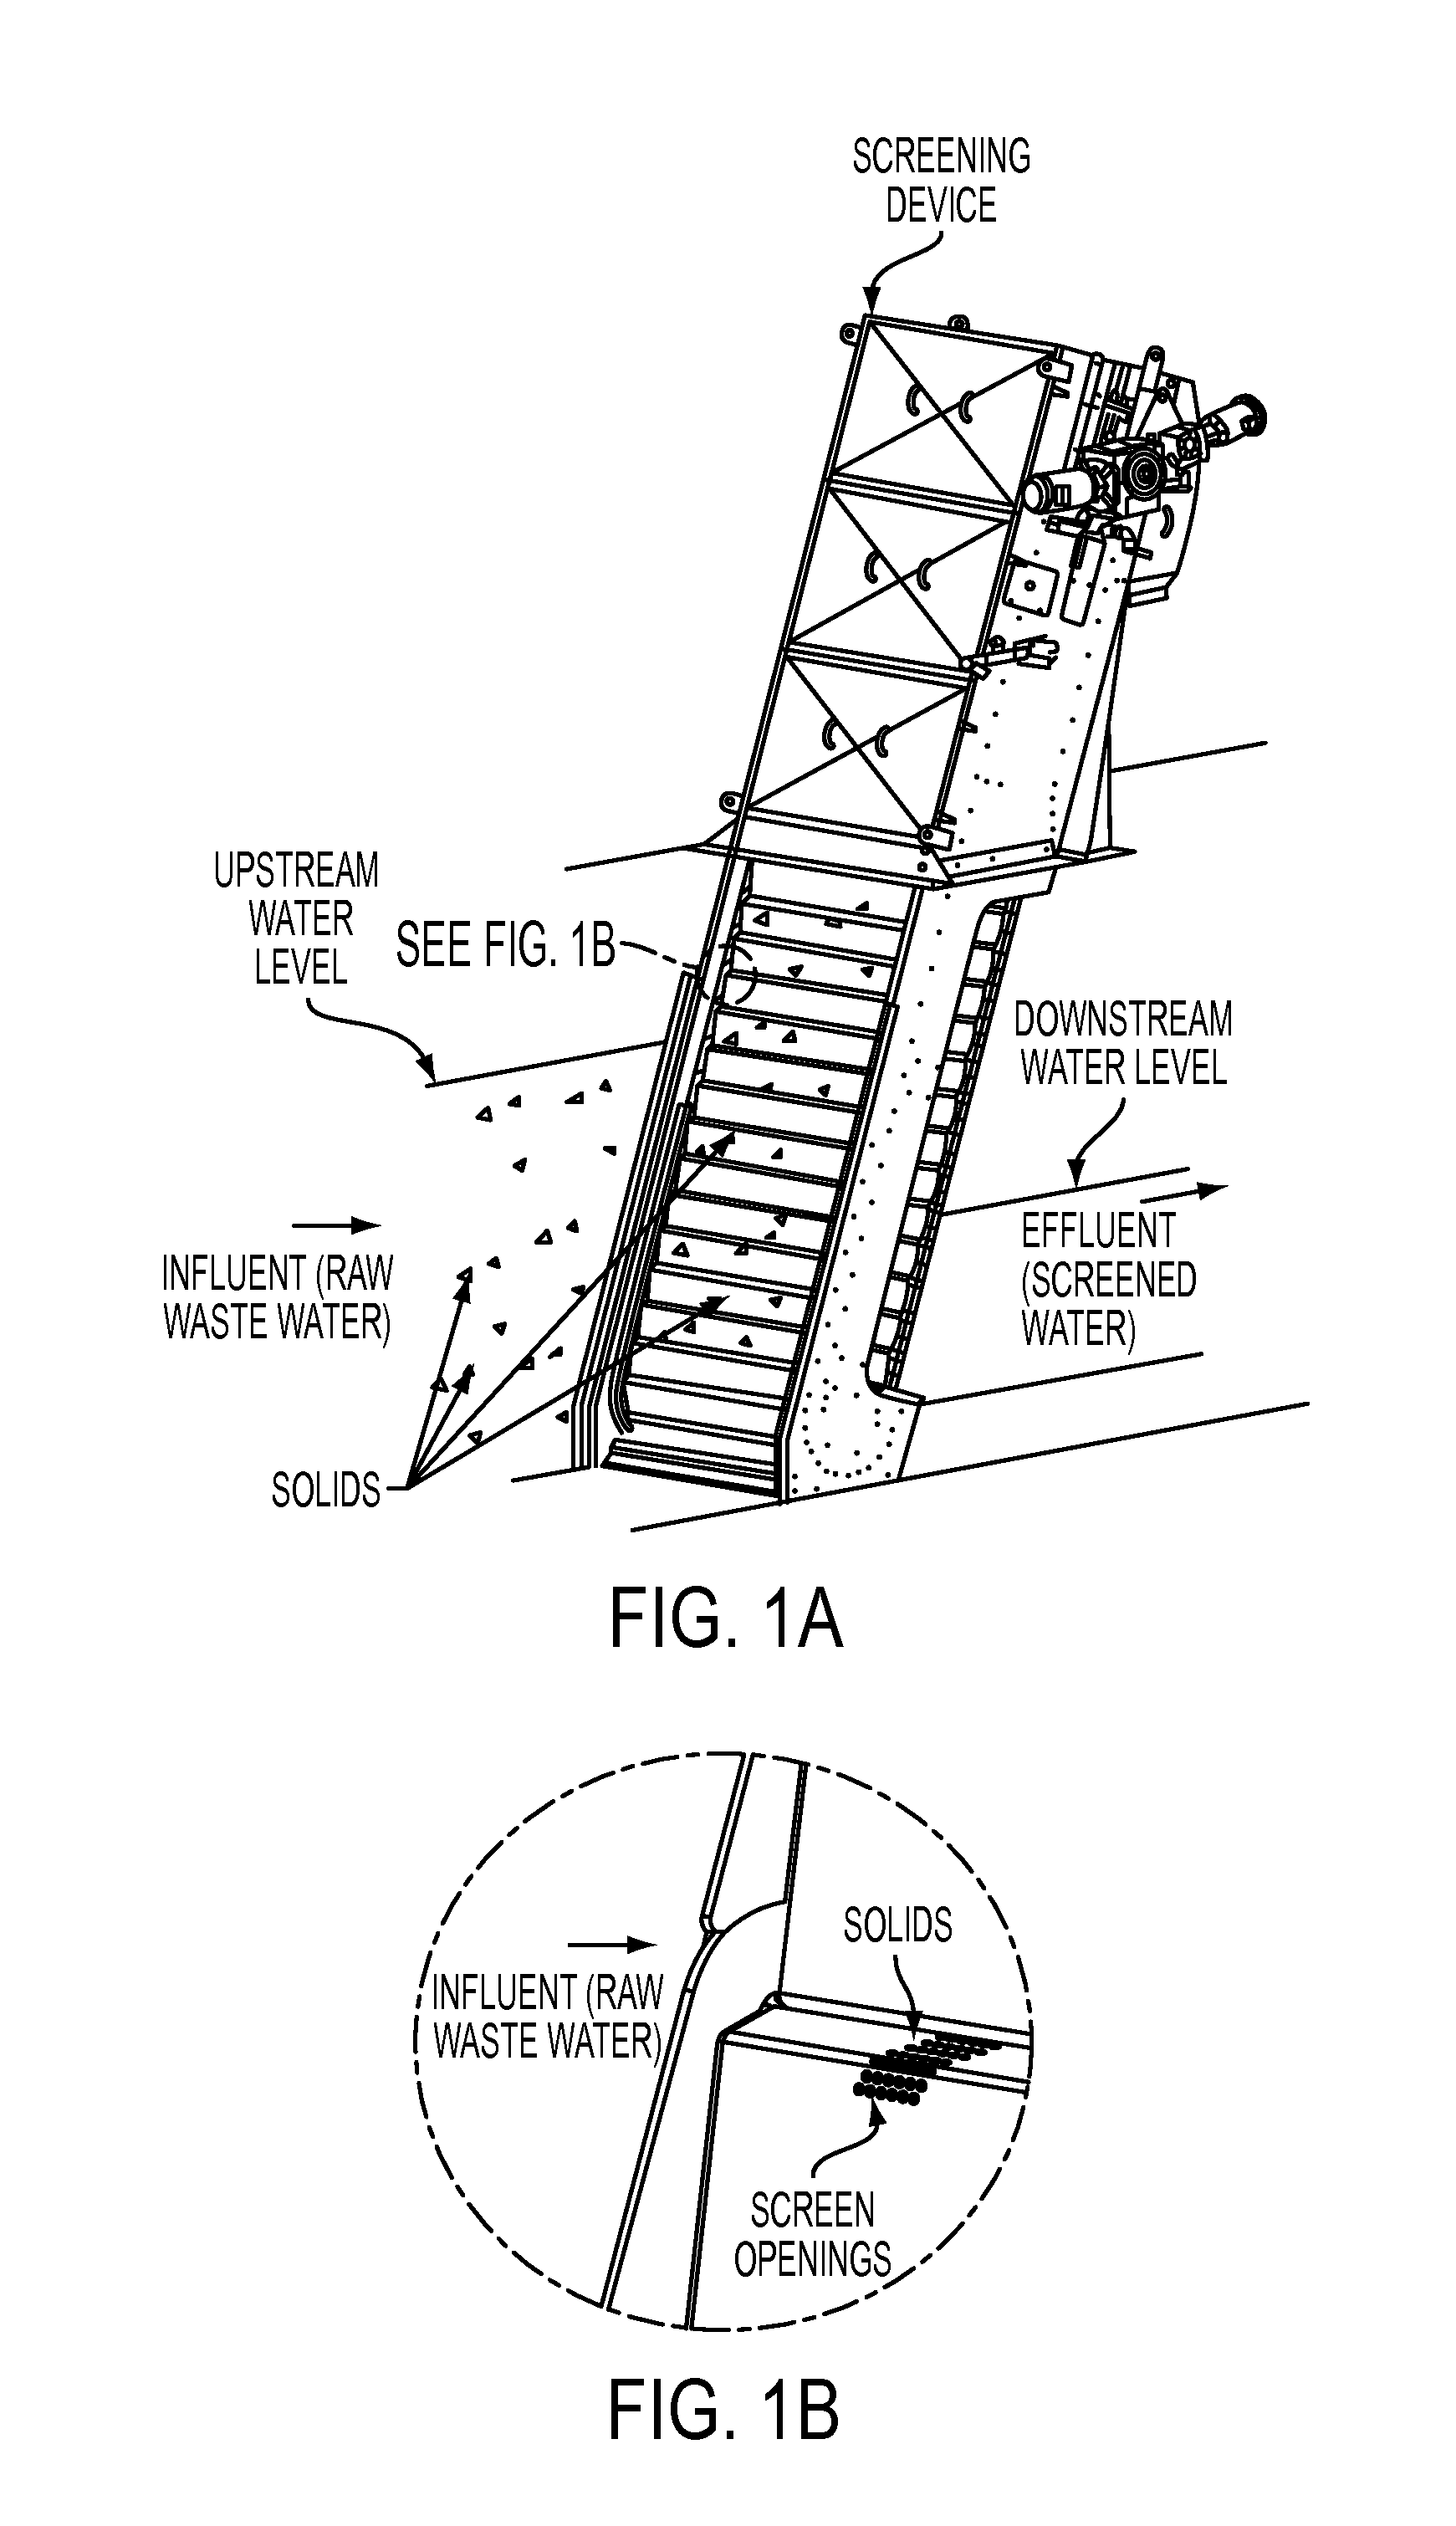 Screen blockage measurement and flow performance optimization system